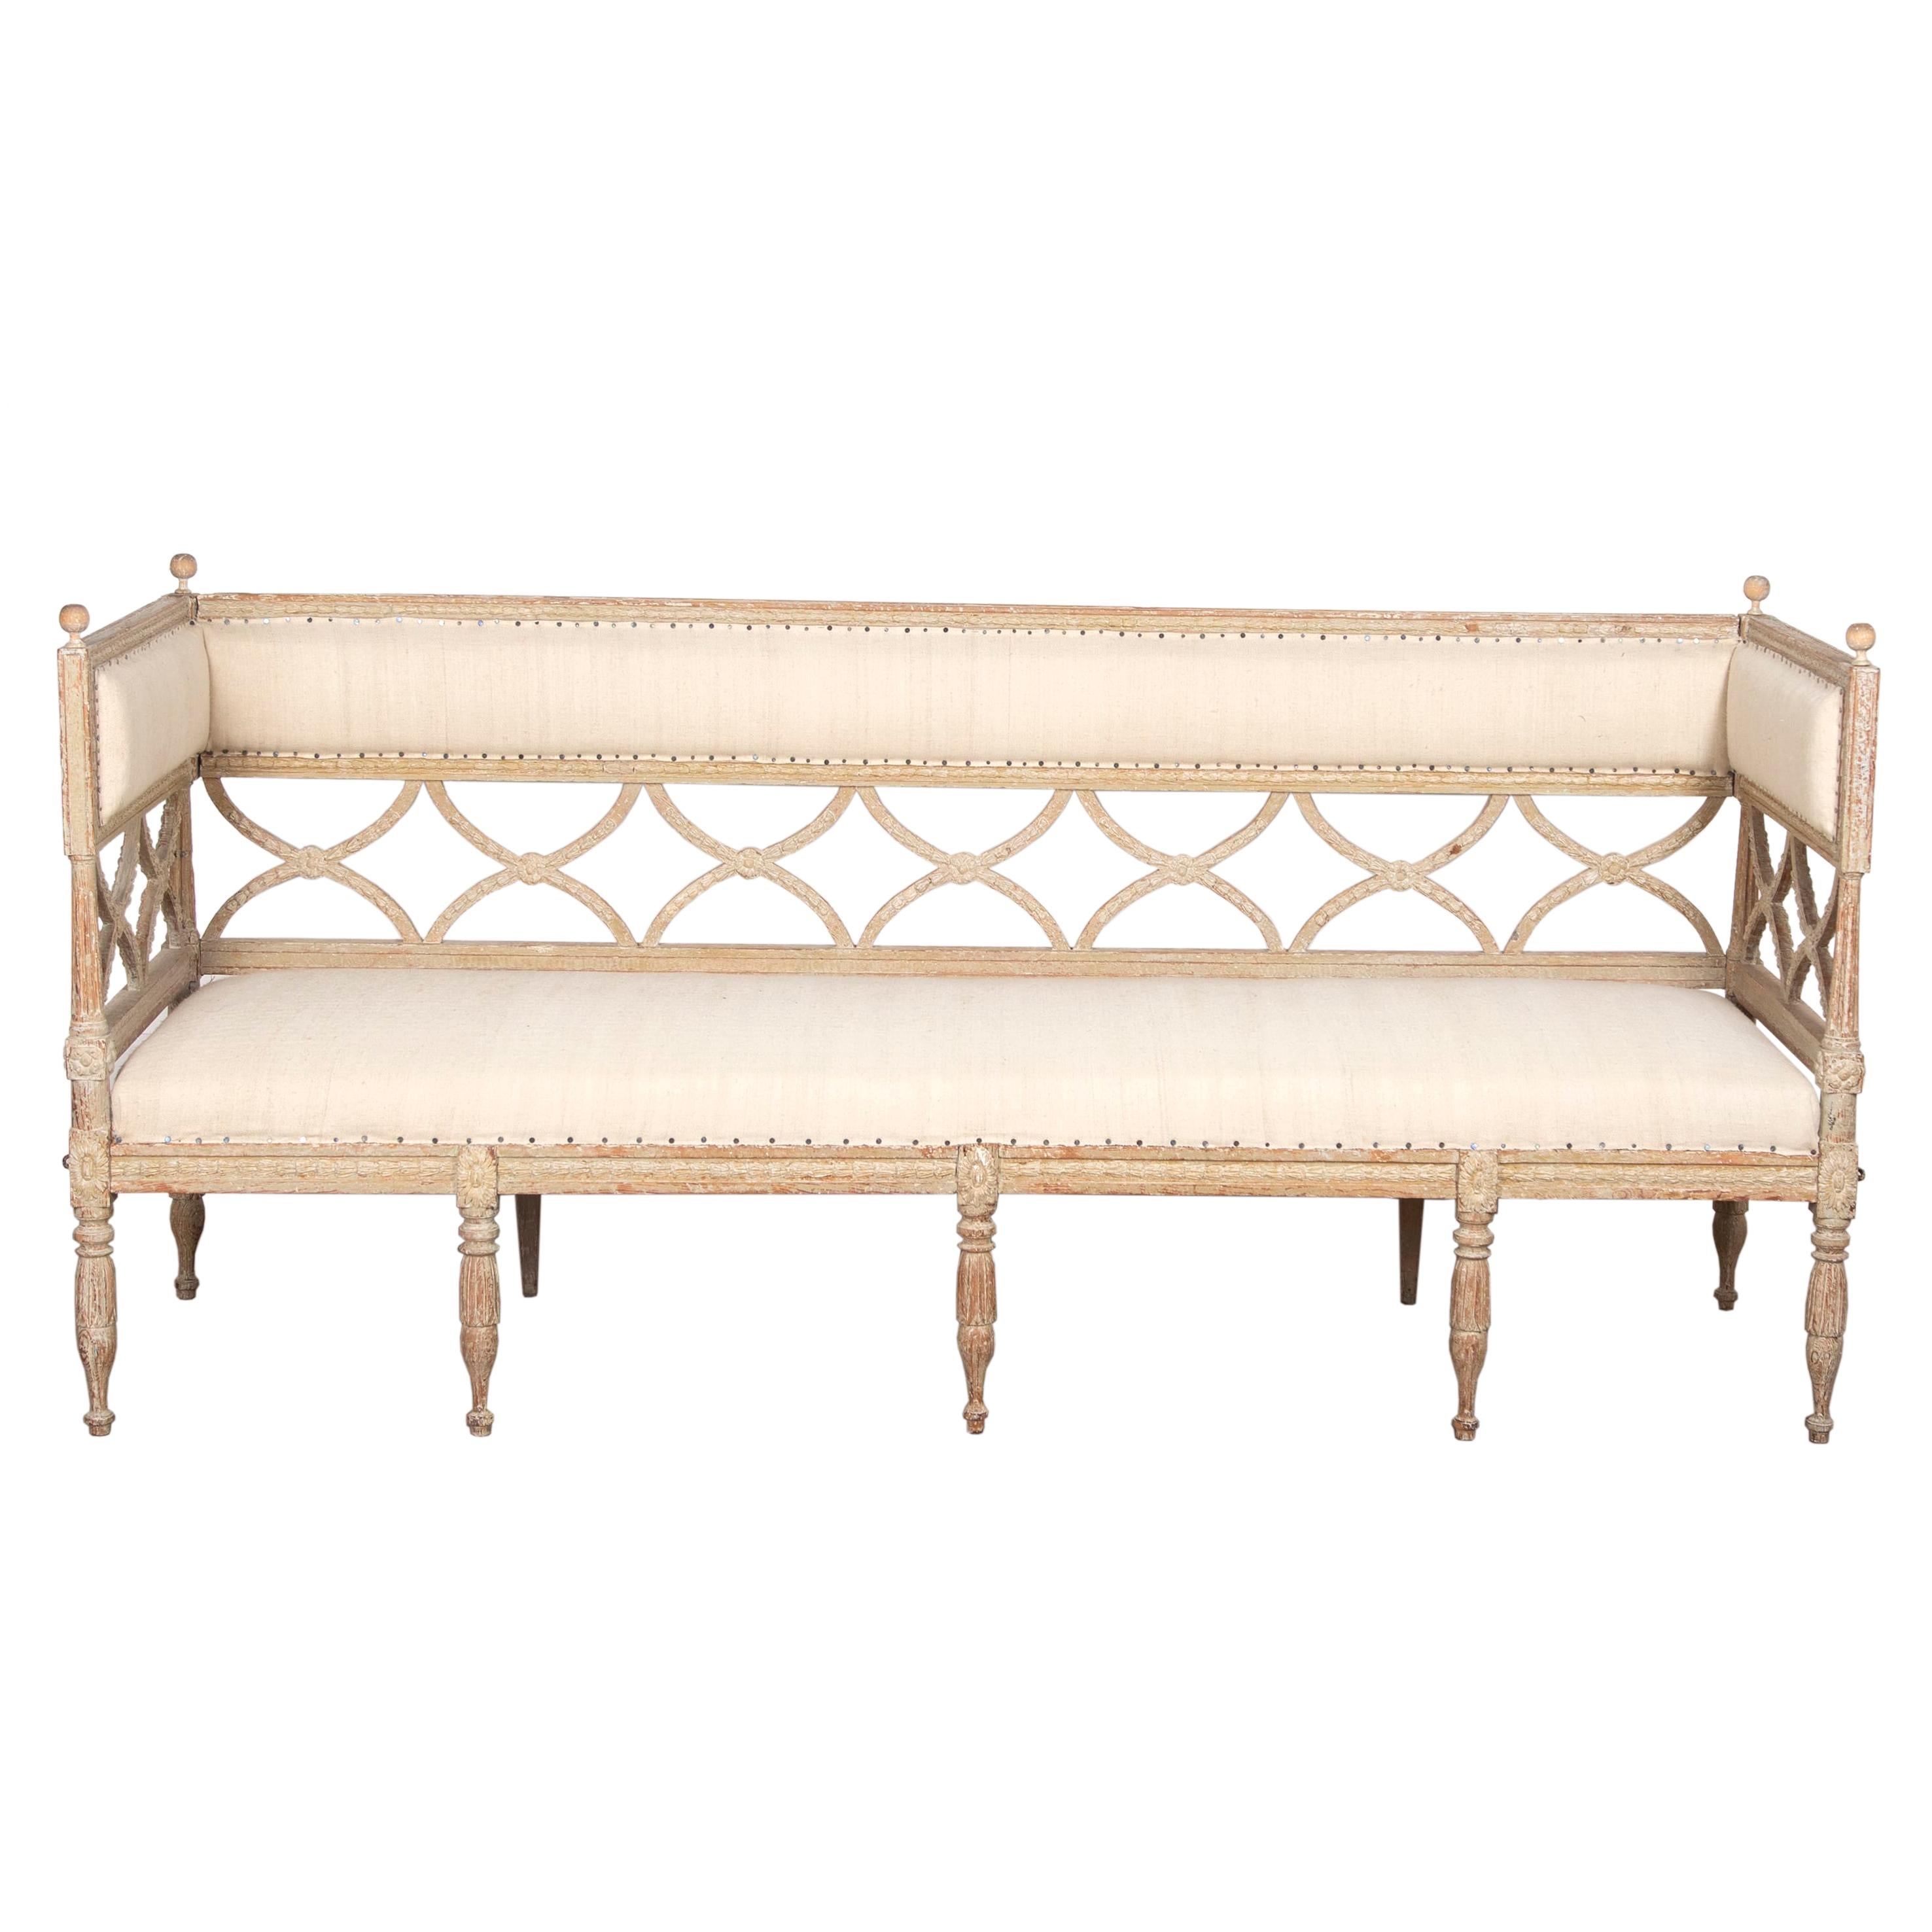 19th century Gustavian sofa scraped to original paint.
This model is referred to as a “Bellman Sofa “ in Sweden. It features the typically curved crosses in the back which gives its name after the famous Swedish poet.
This sofa is extra special